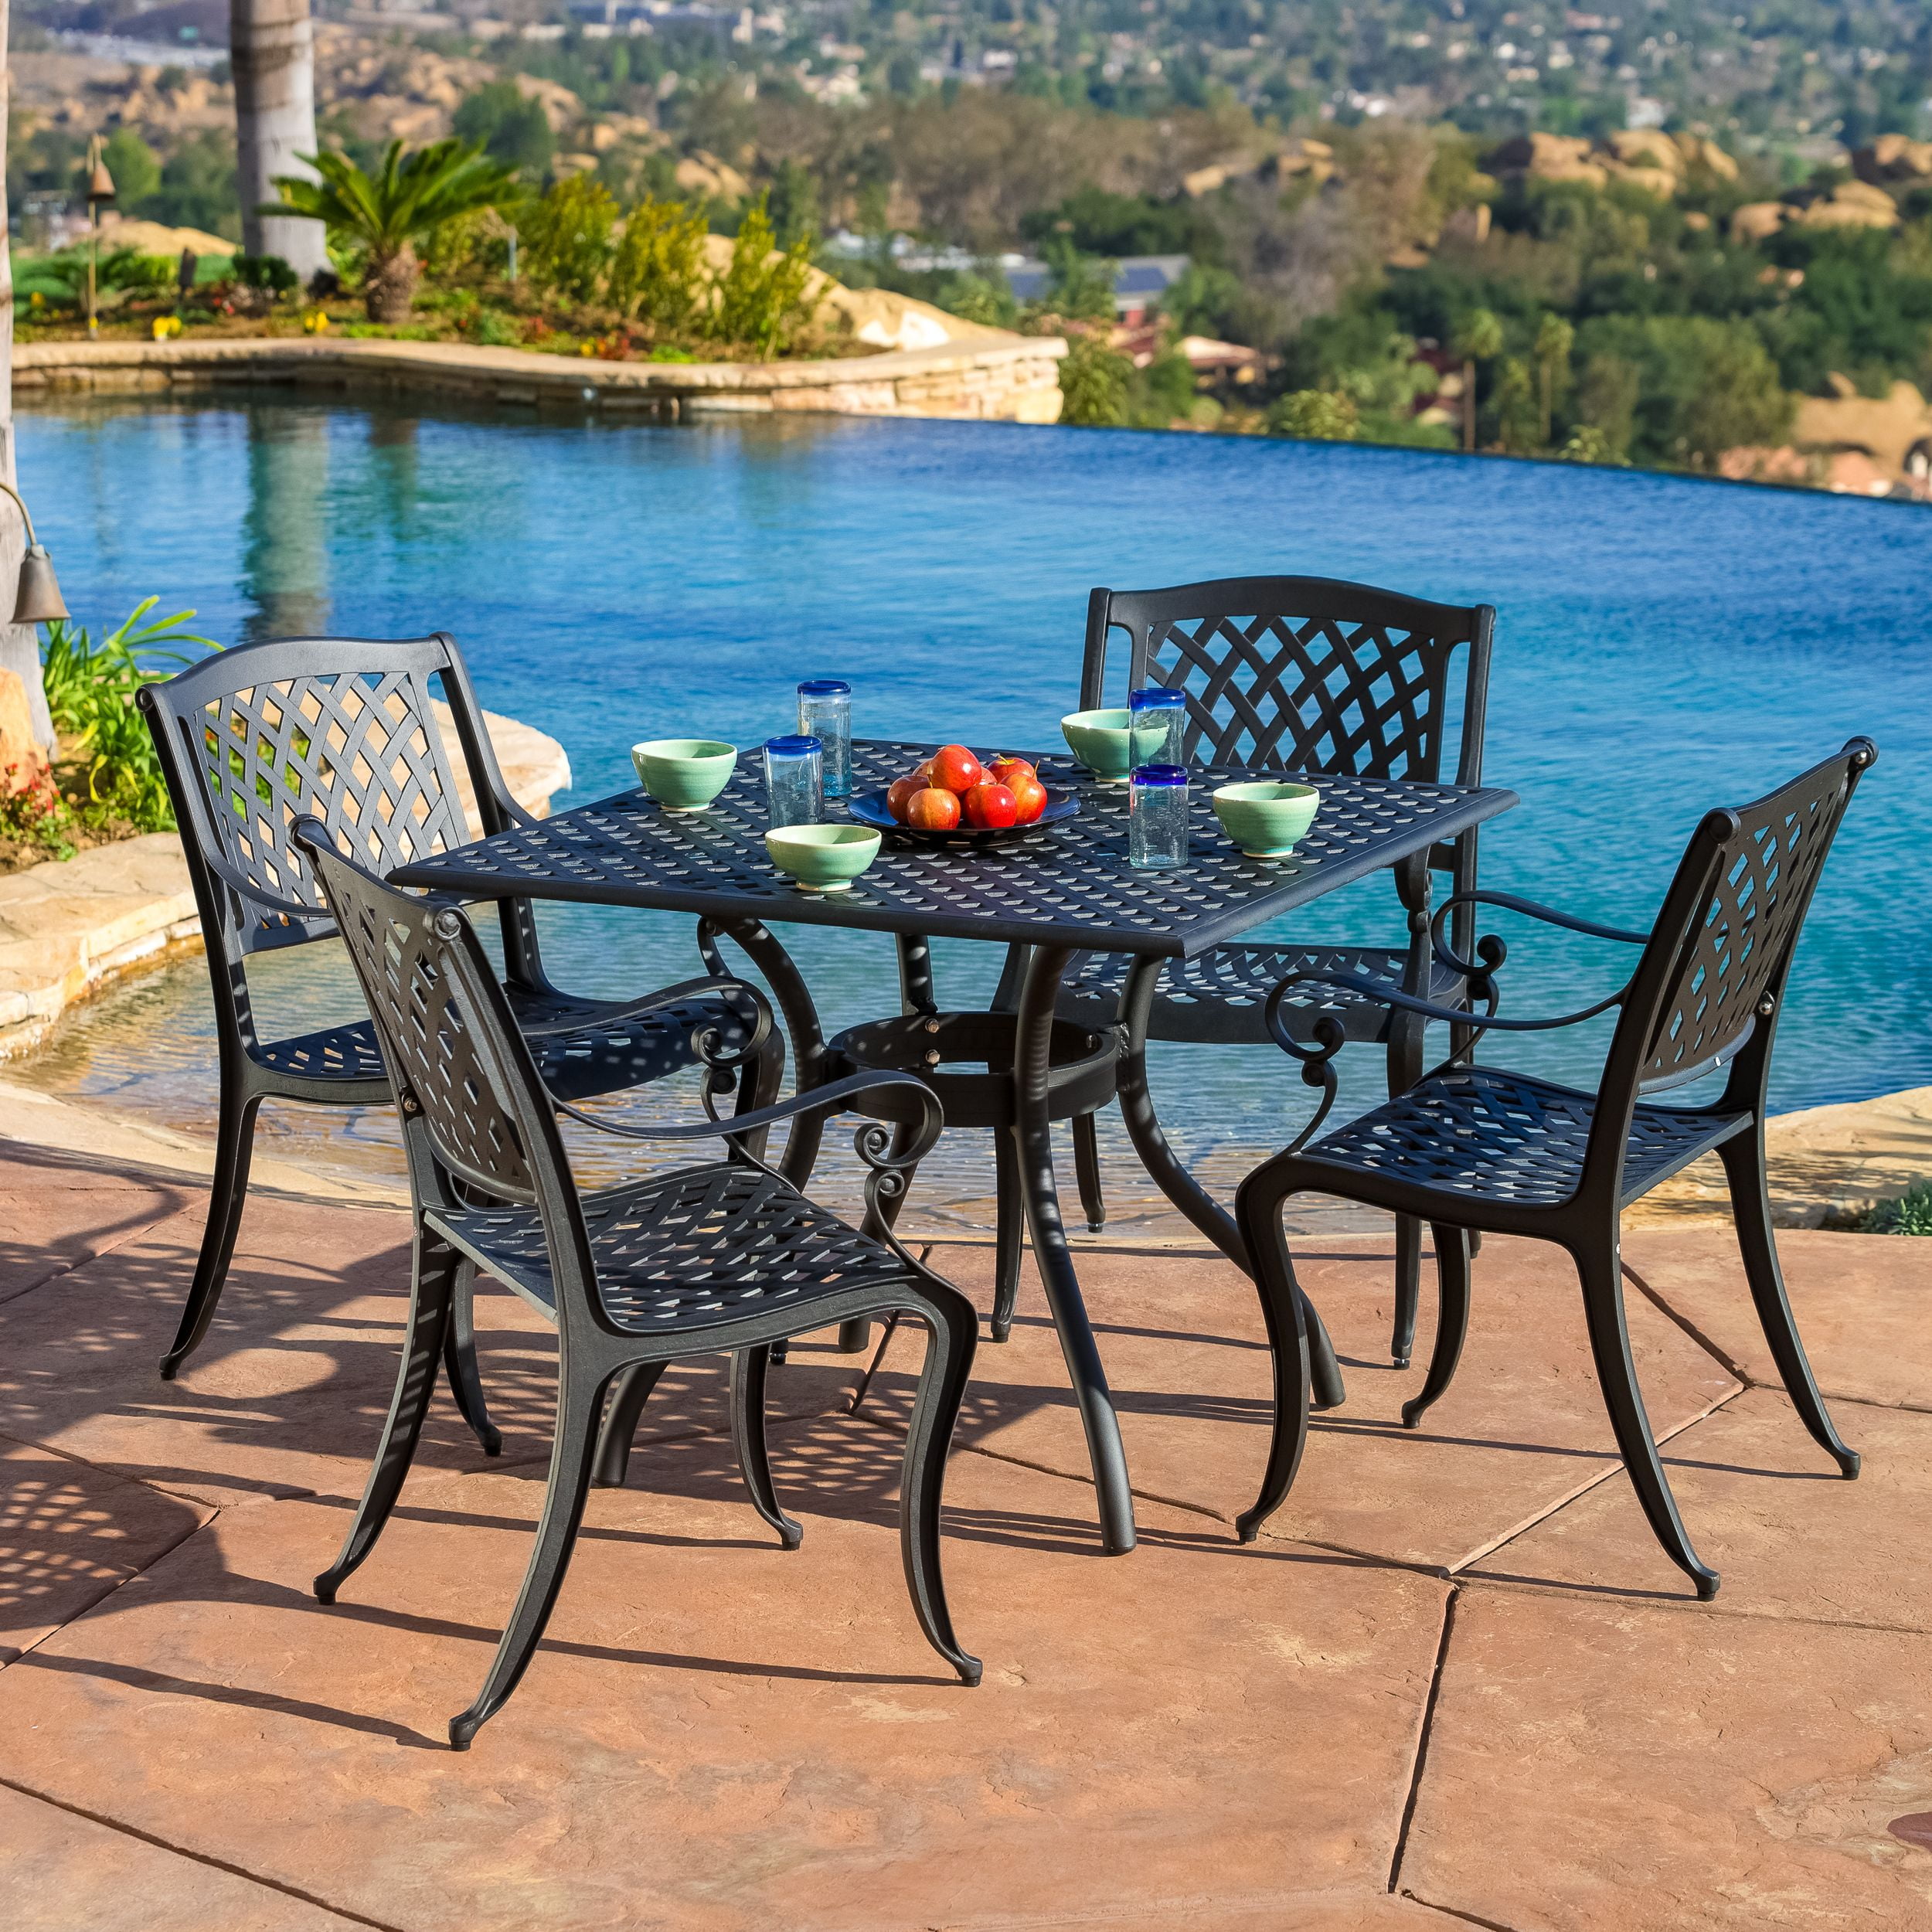 Outdoor Dining Set, Black Cast Aluminum Outdoor Dining Chairs